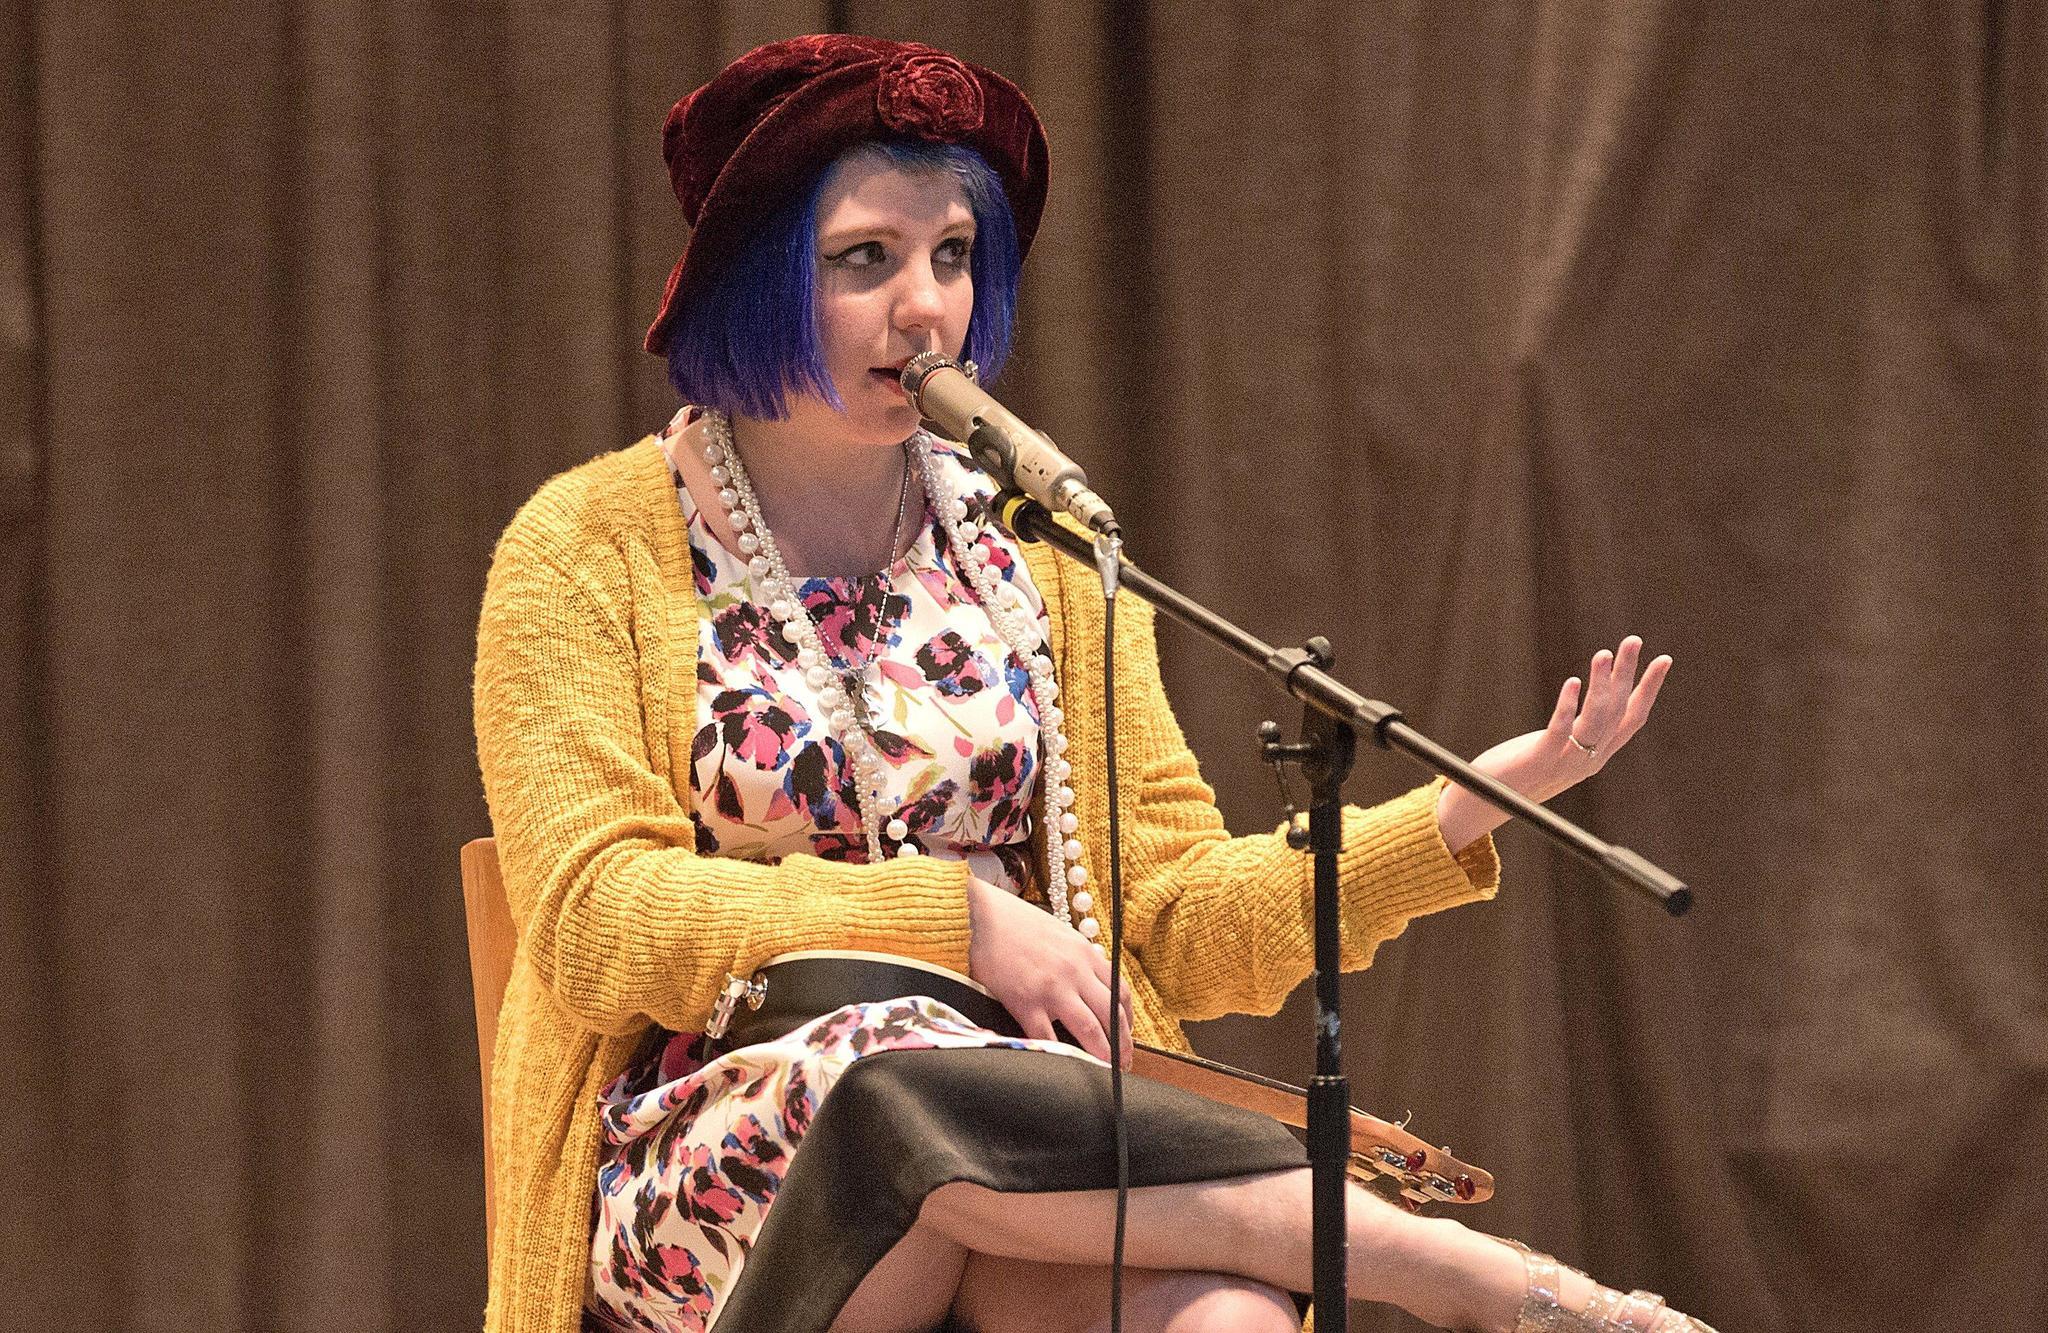 Joey Cook proves there's life after 'American Idol' - Daily Press